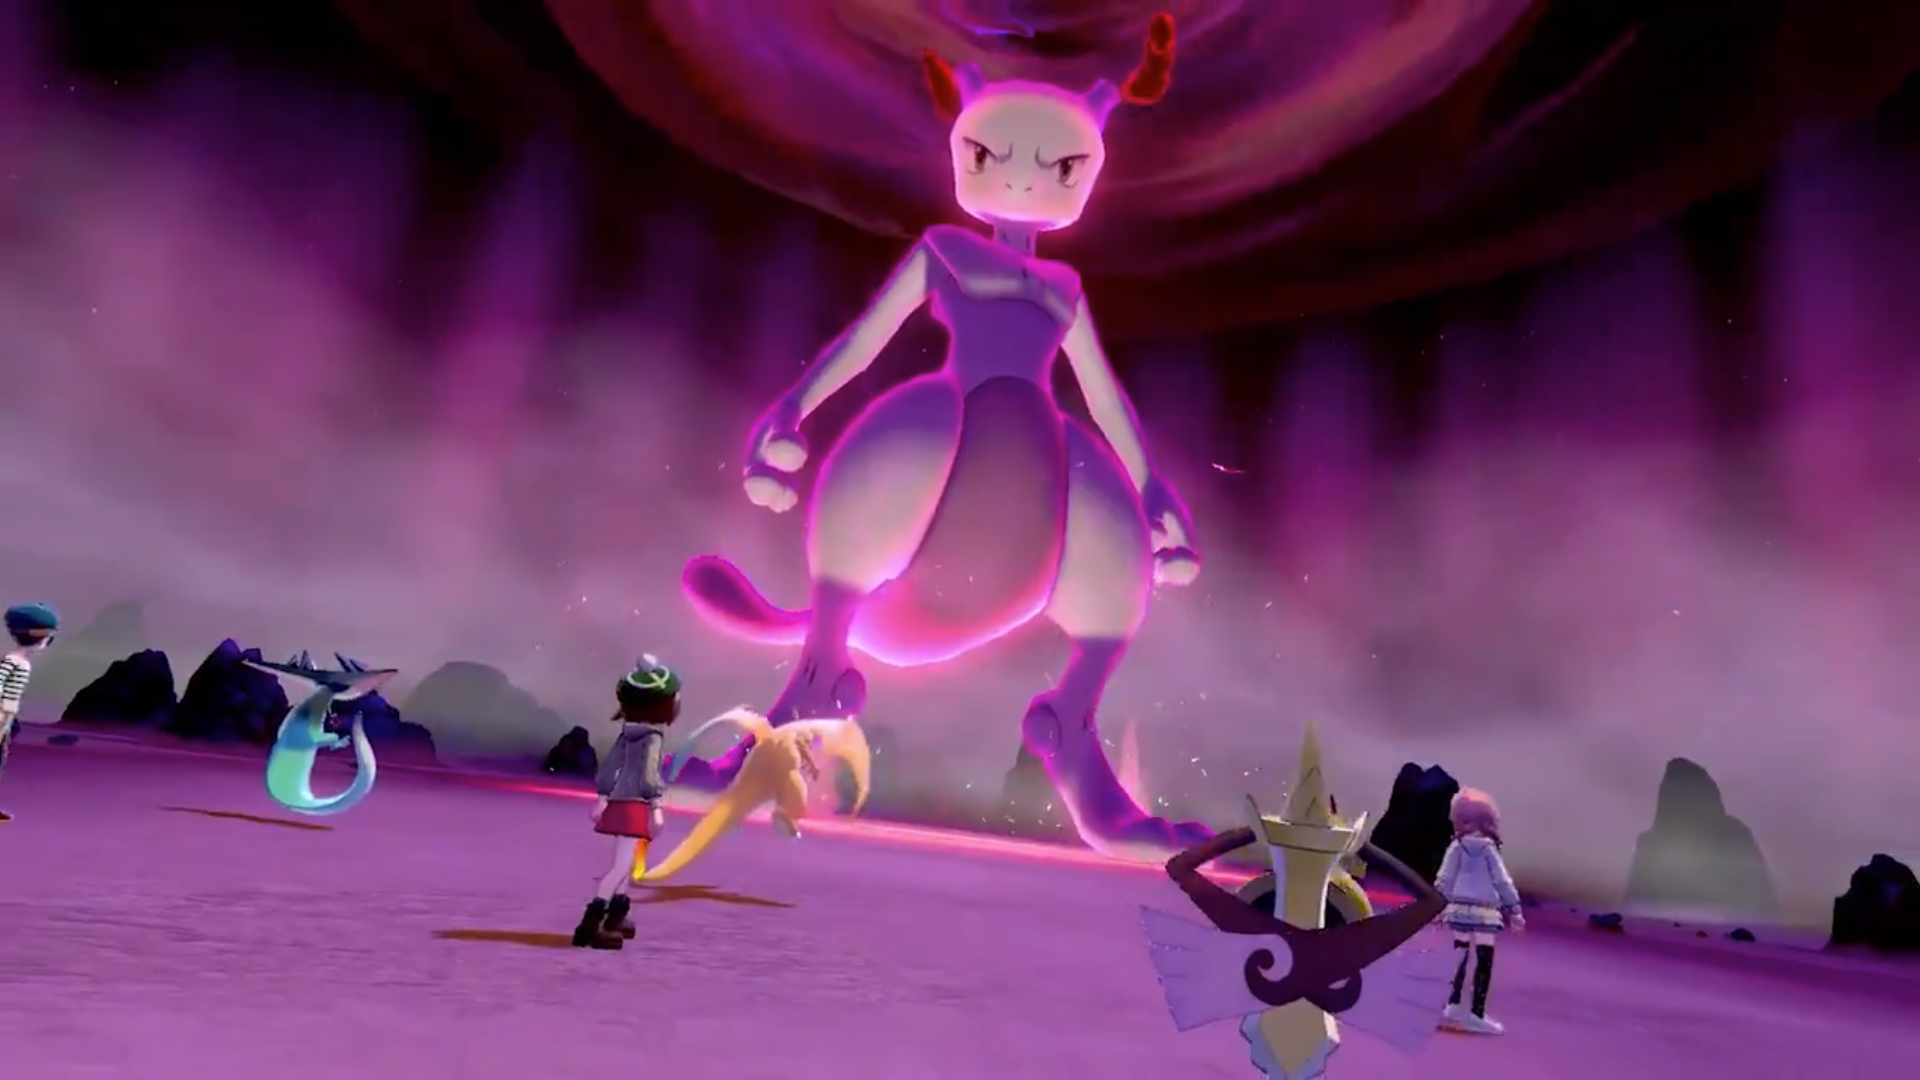 Shiny Mewtwo Video Games -  UK